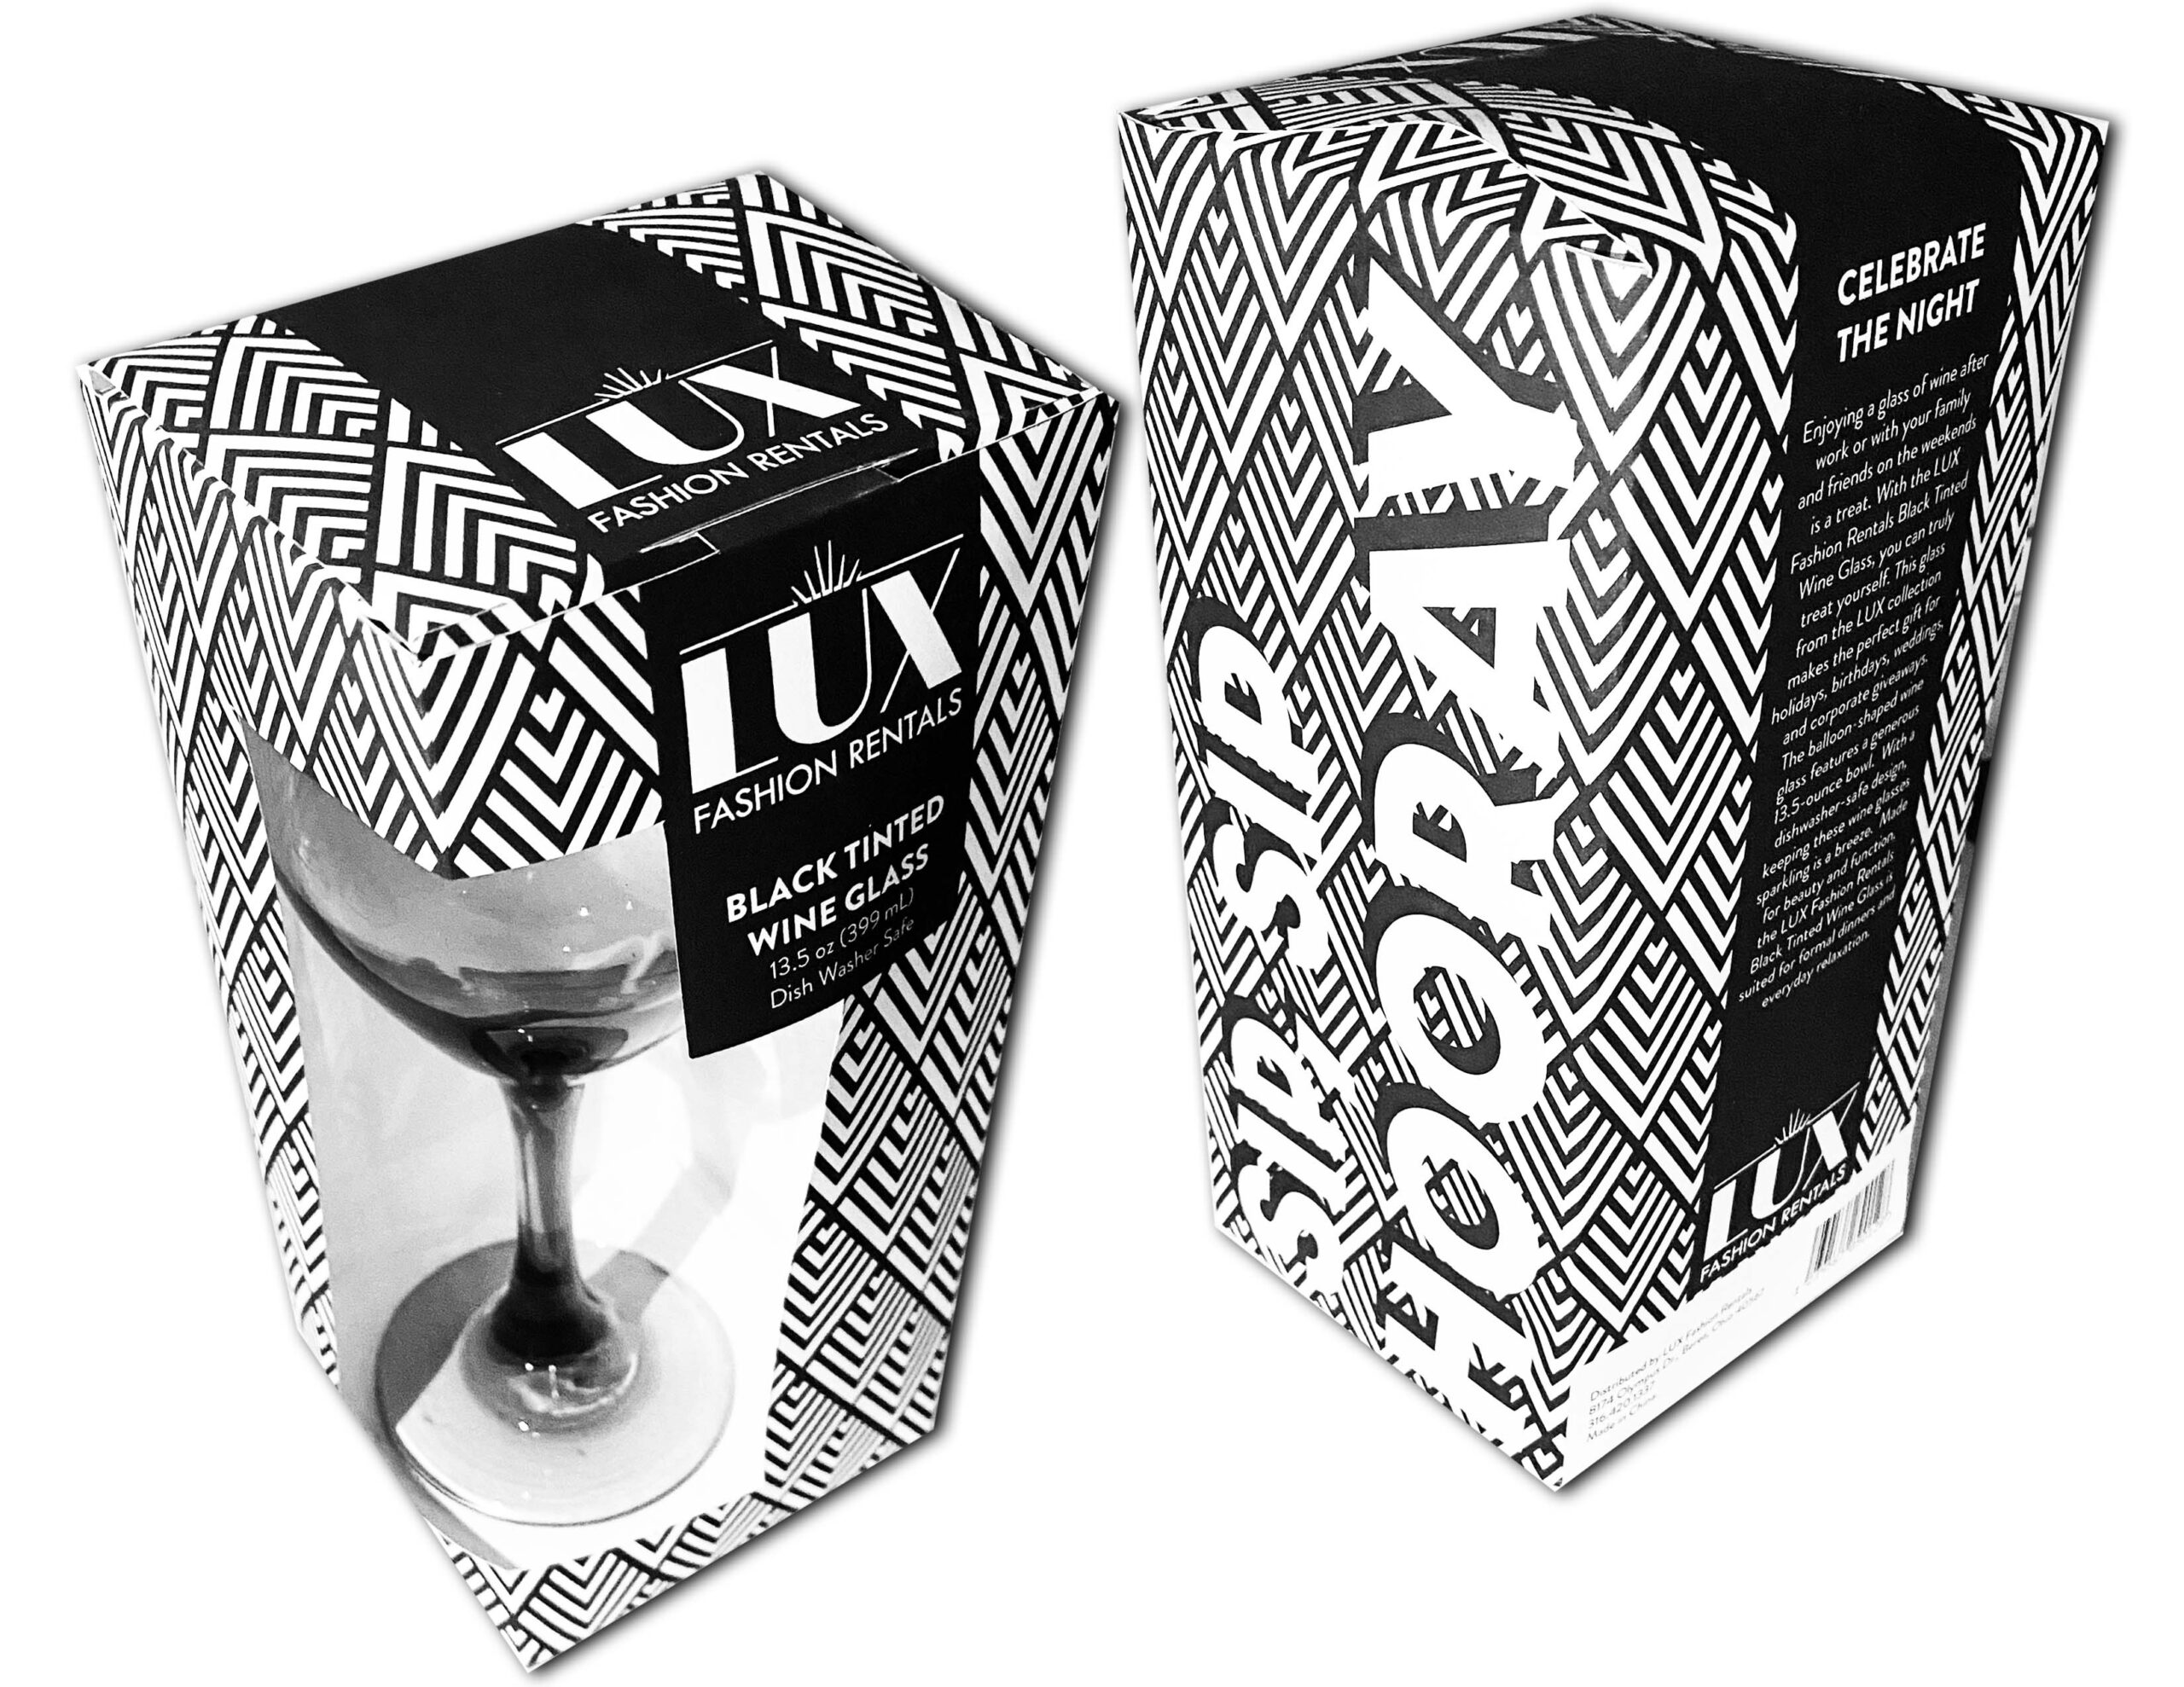 LUX Fashion Rentals Wine Glass Packaging